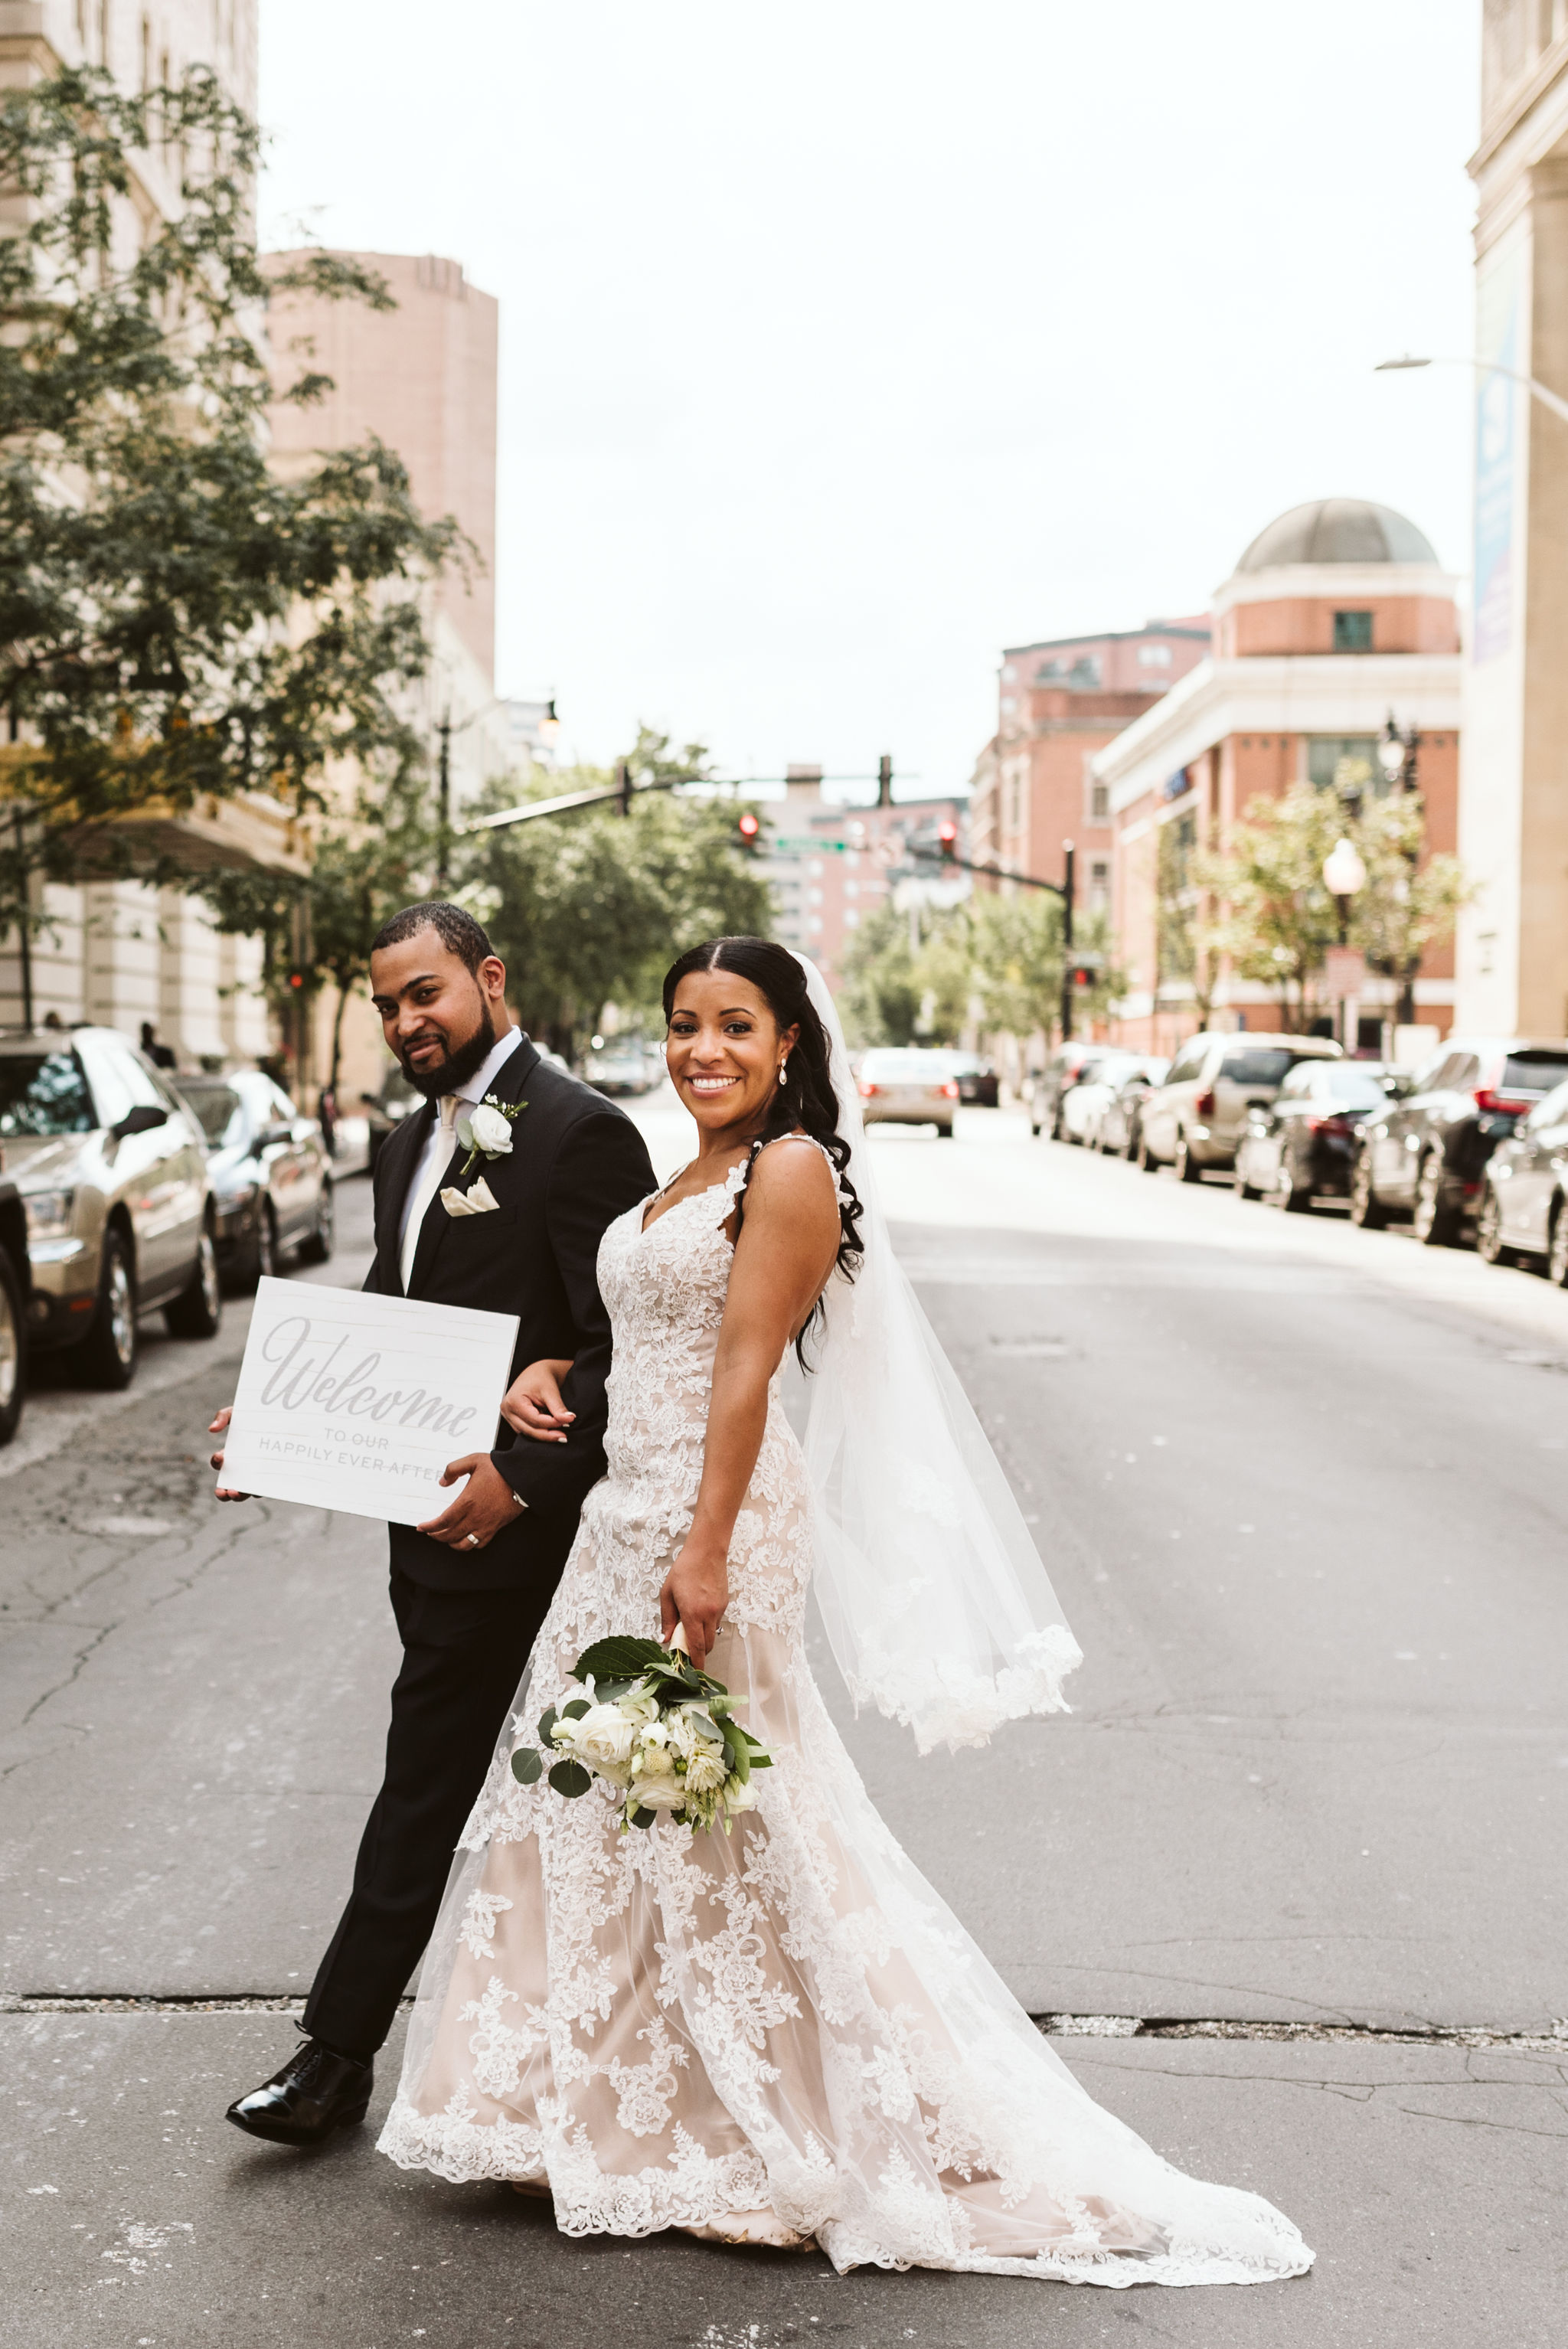  Baltimore, Maryland Wedding Photographer, Mount Vernon, Chase Court, Classic, Outdoor Ceremony, Garden, Romantic, Bride and groom Crossing Street Downtown Baltimore, Couple Holding Hands 